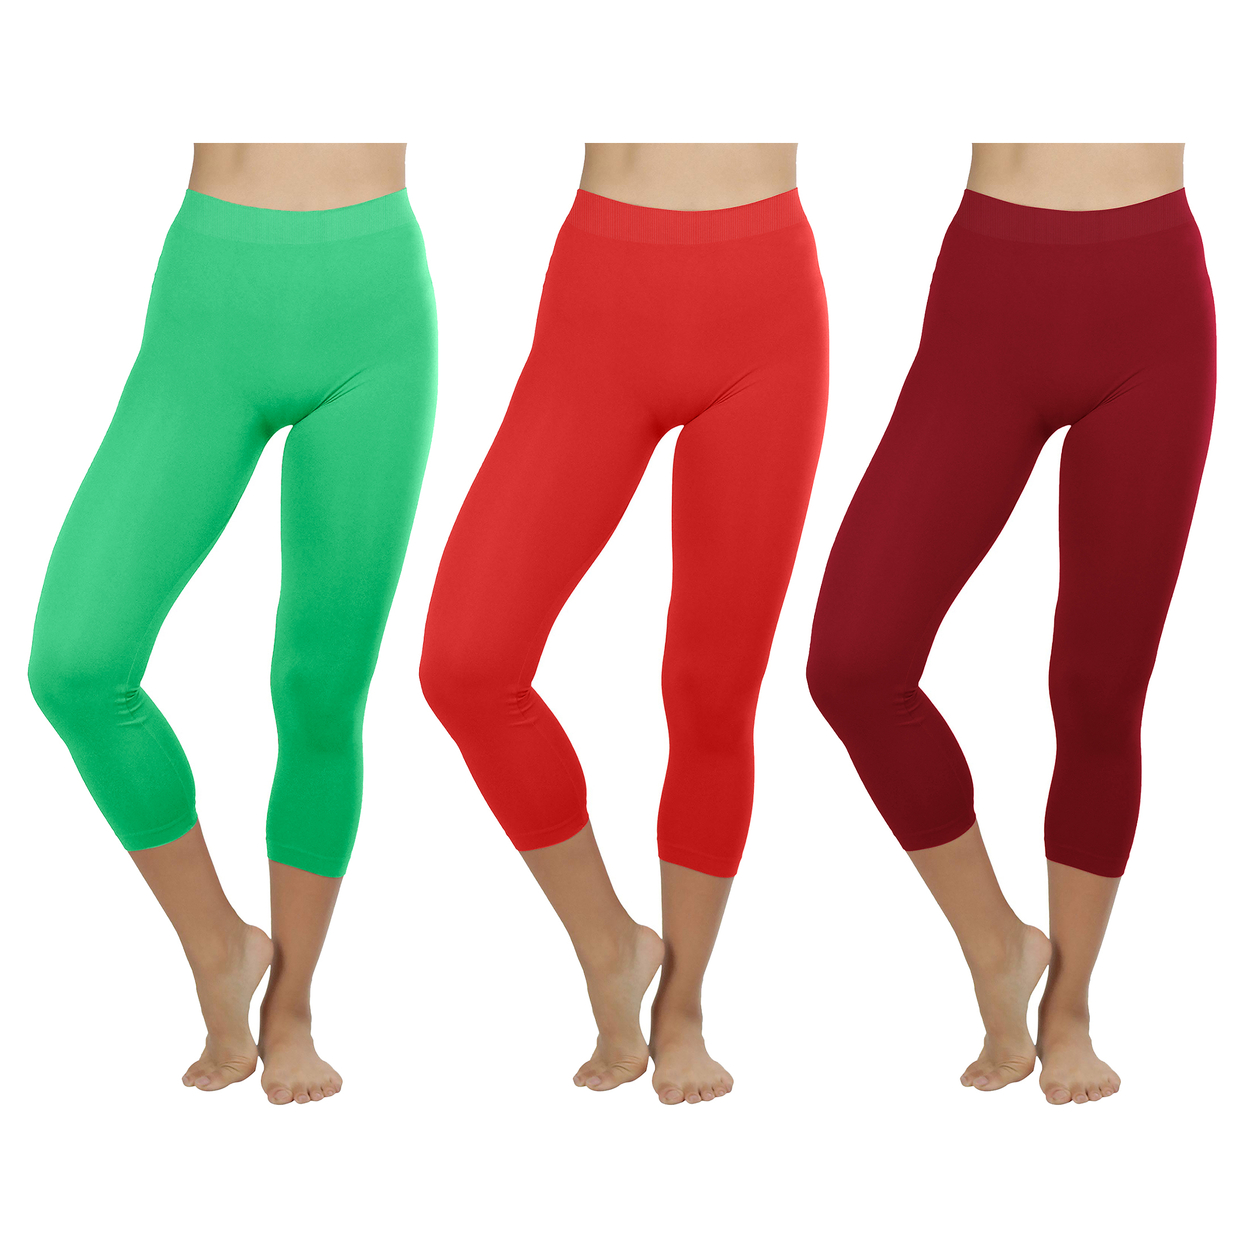 3-Pack: Women's Ultra-Soft High Waisted Smooth Stretch Active Yoga Capri Leggings - Red,red,red, X-large